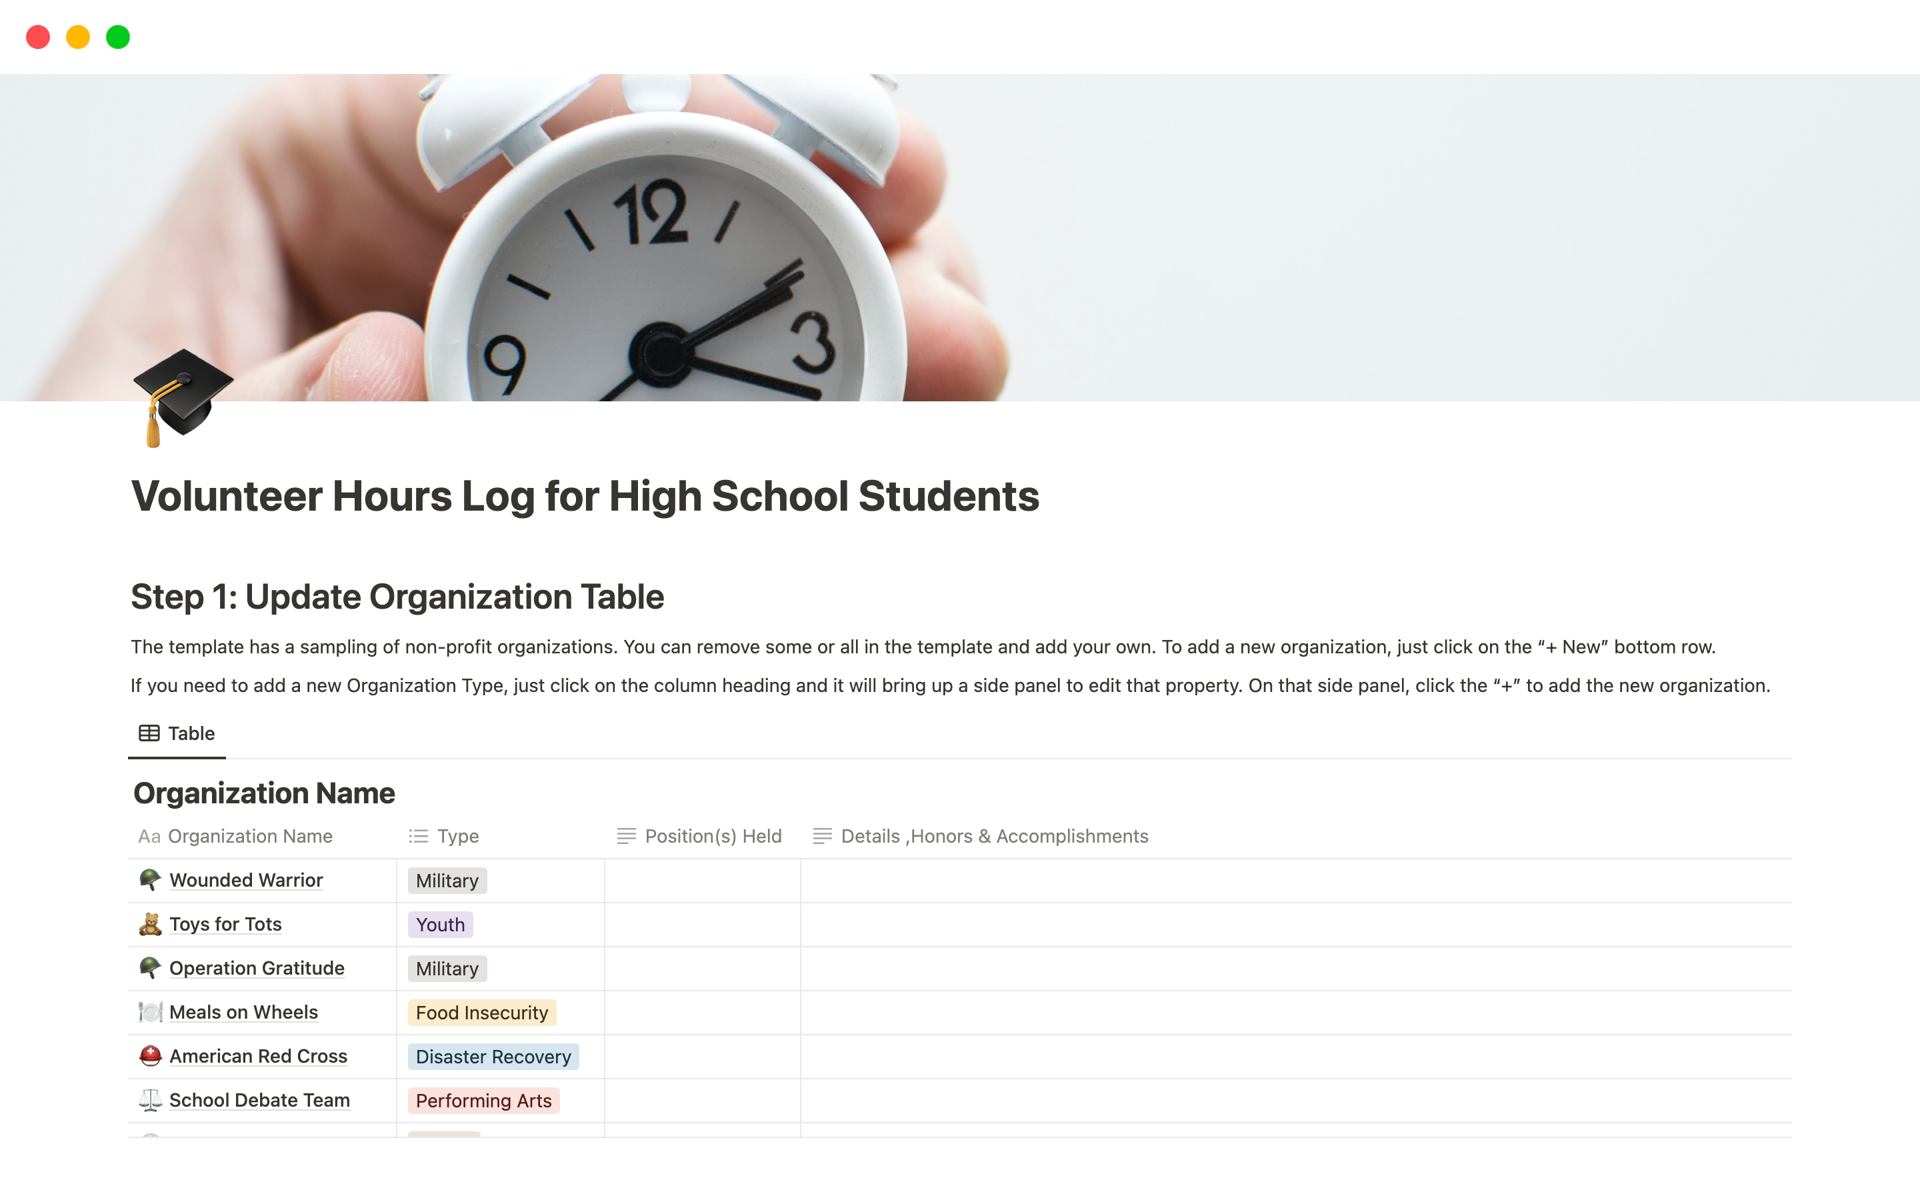 This template will help high school students keep track of volunteer service hours in a way that will help them fill out college applications.